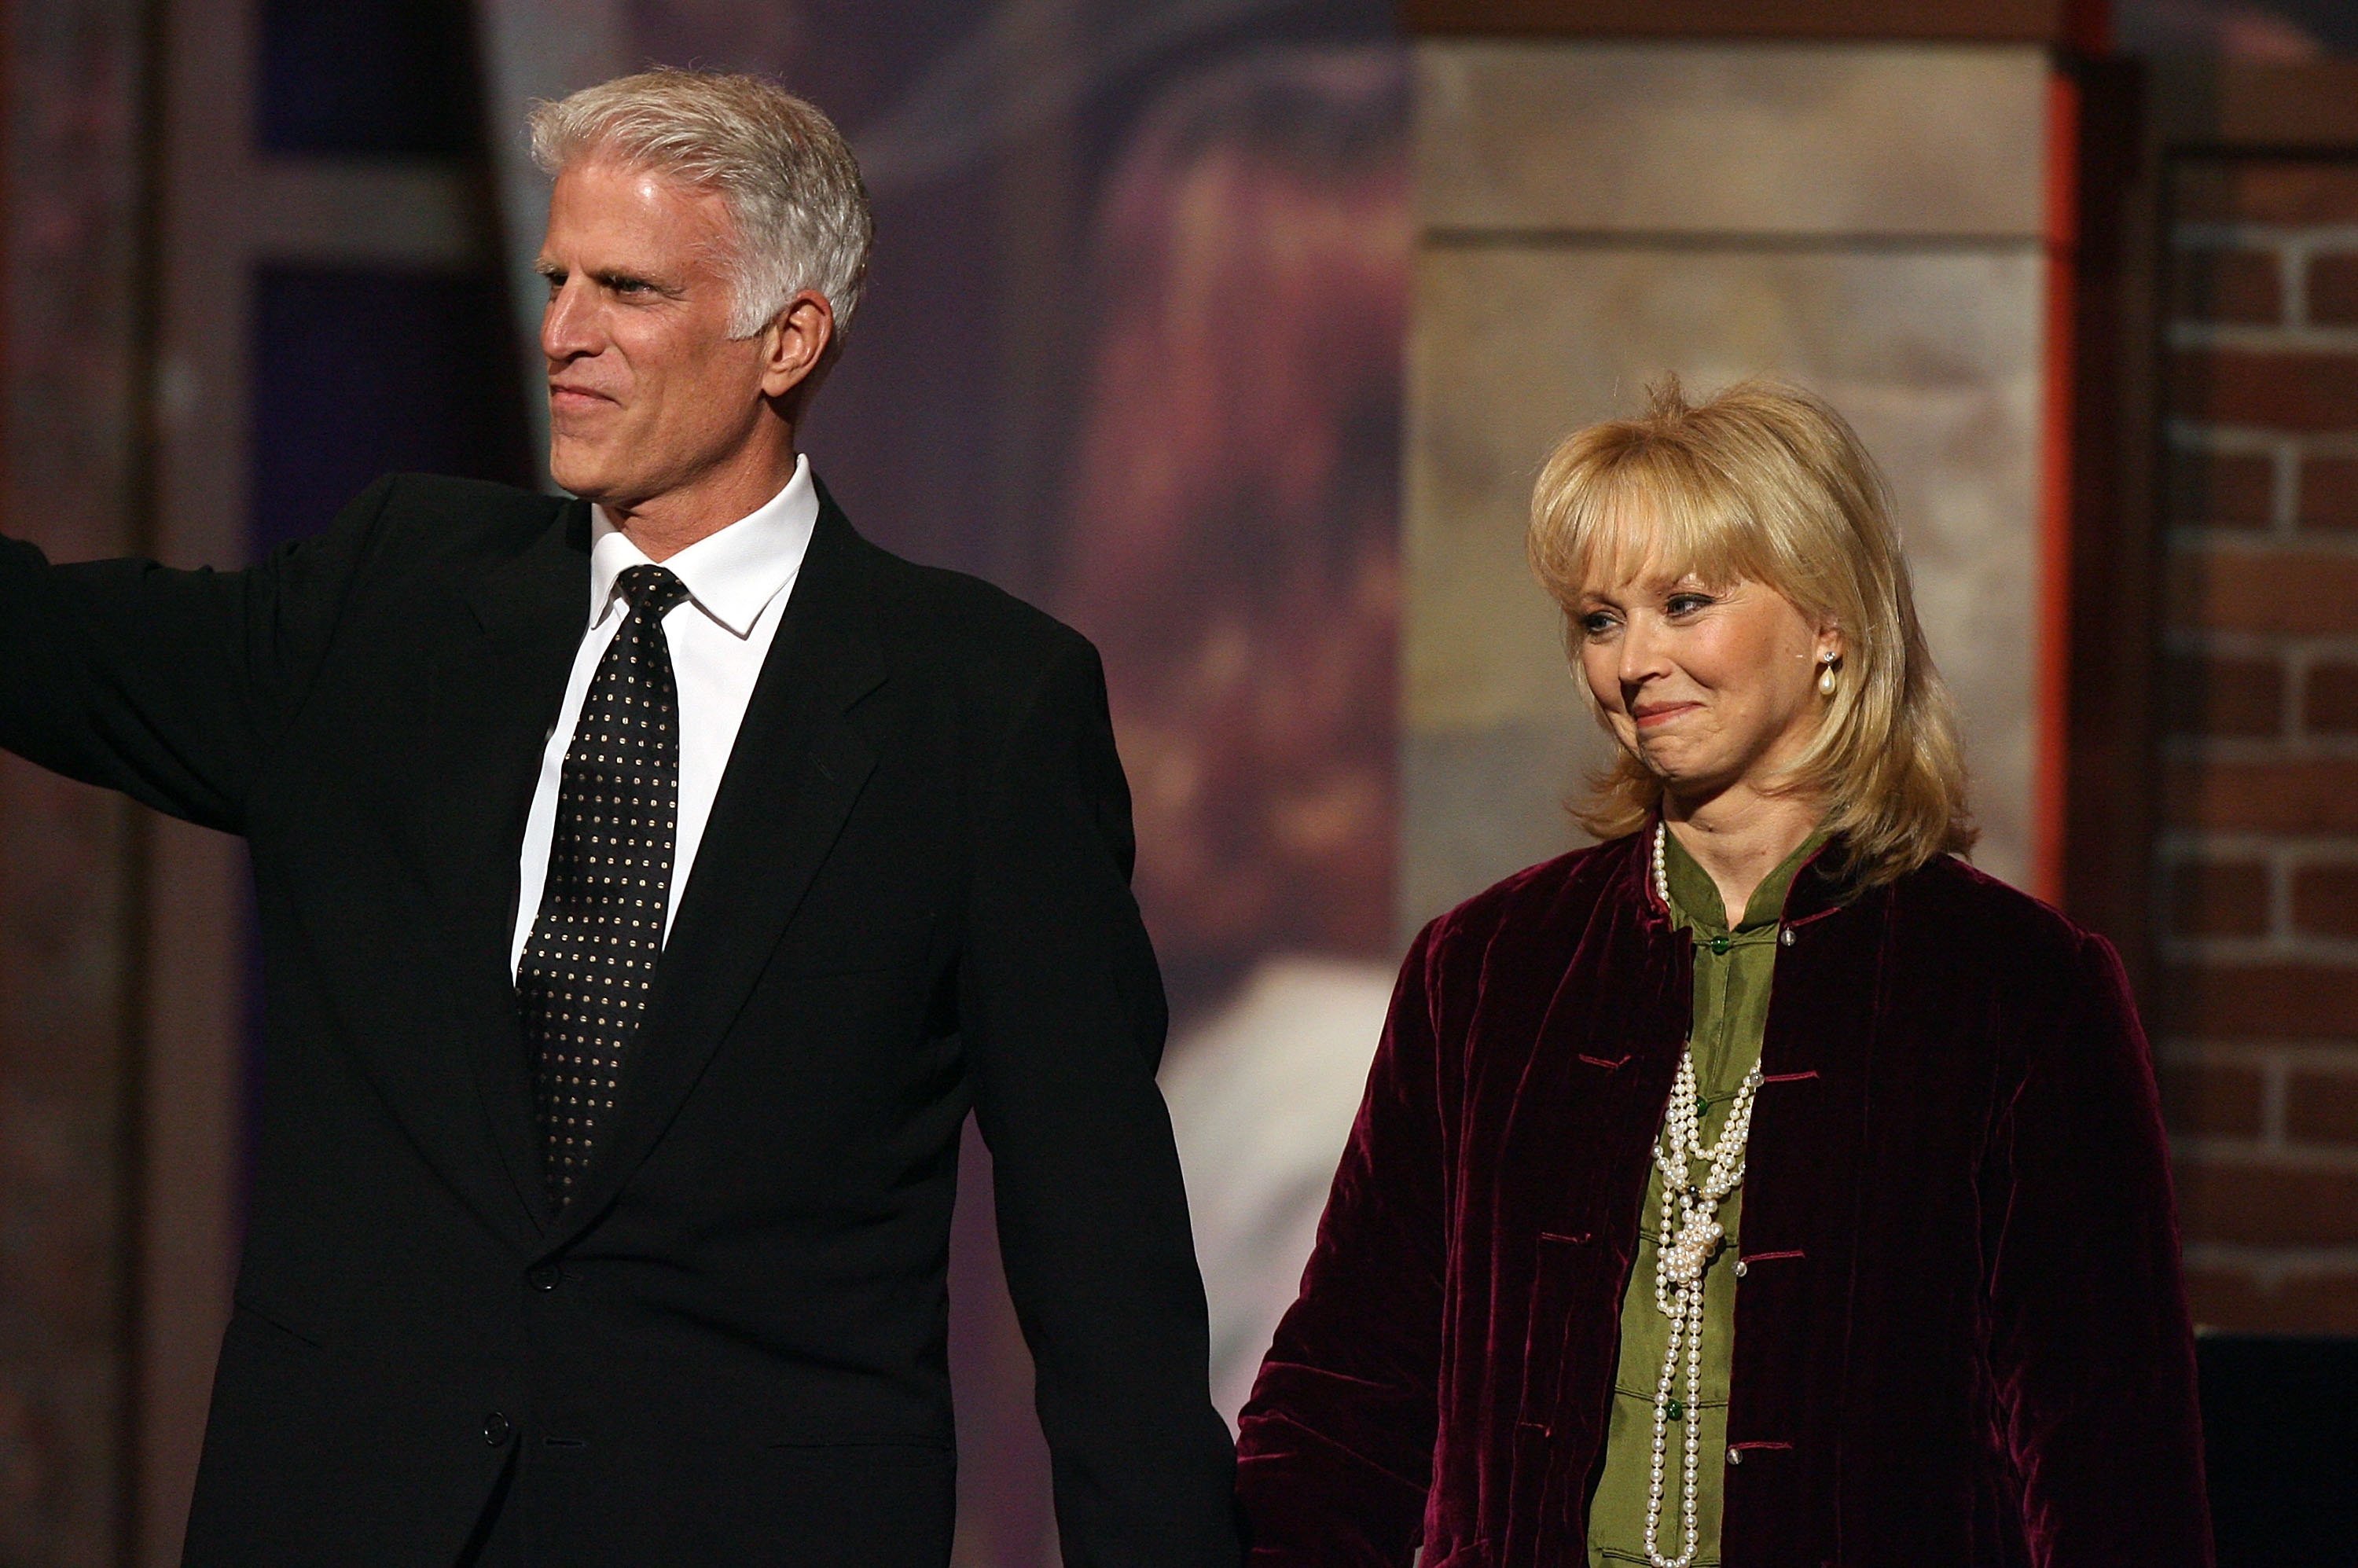 Ted Danson and Shelley Long onstage at the 2006 TV Land Awards at the Barker Hangar on March 19, 2006 in Santa Monica, California I Source: Getty Images